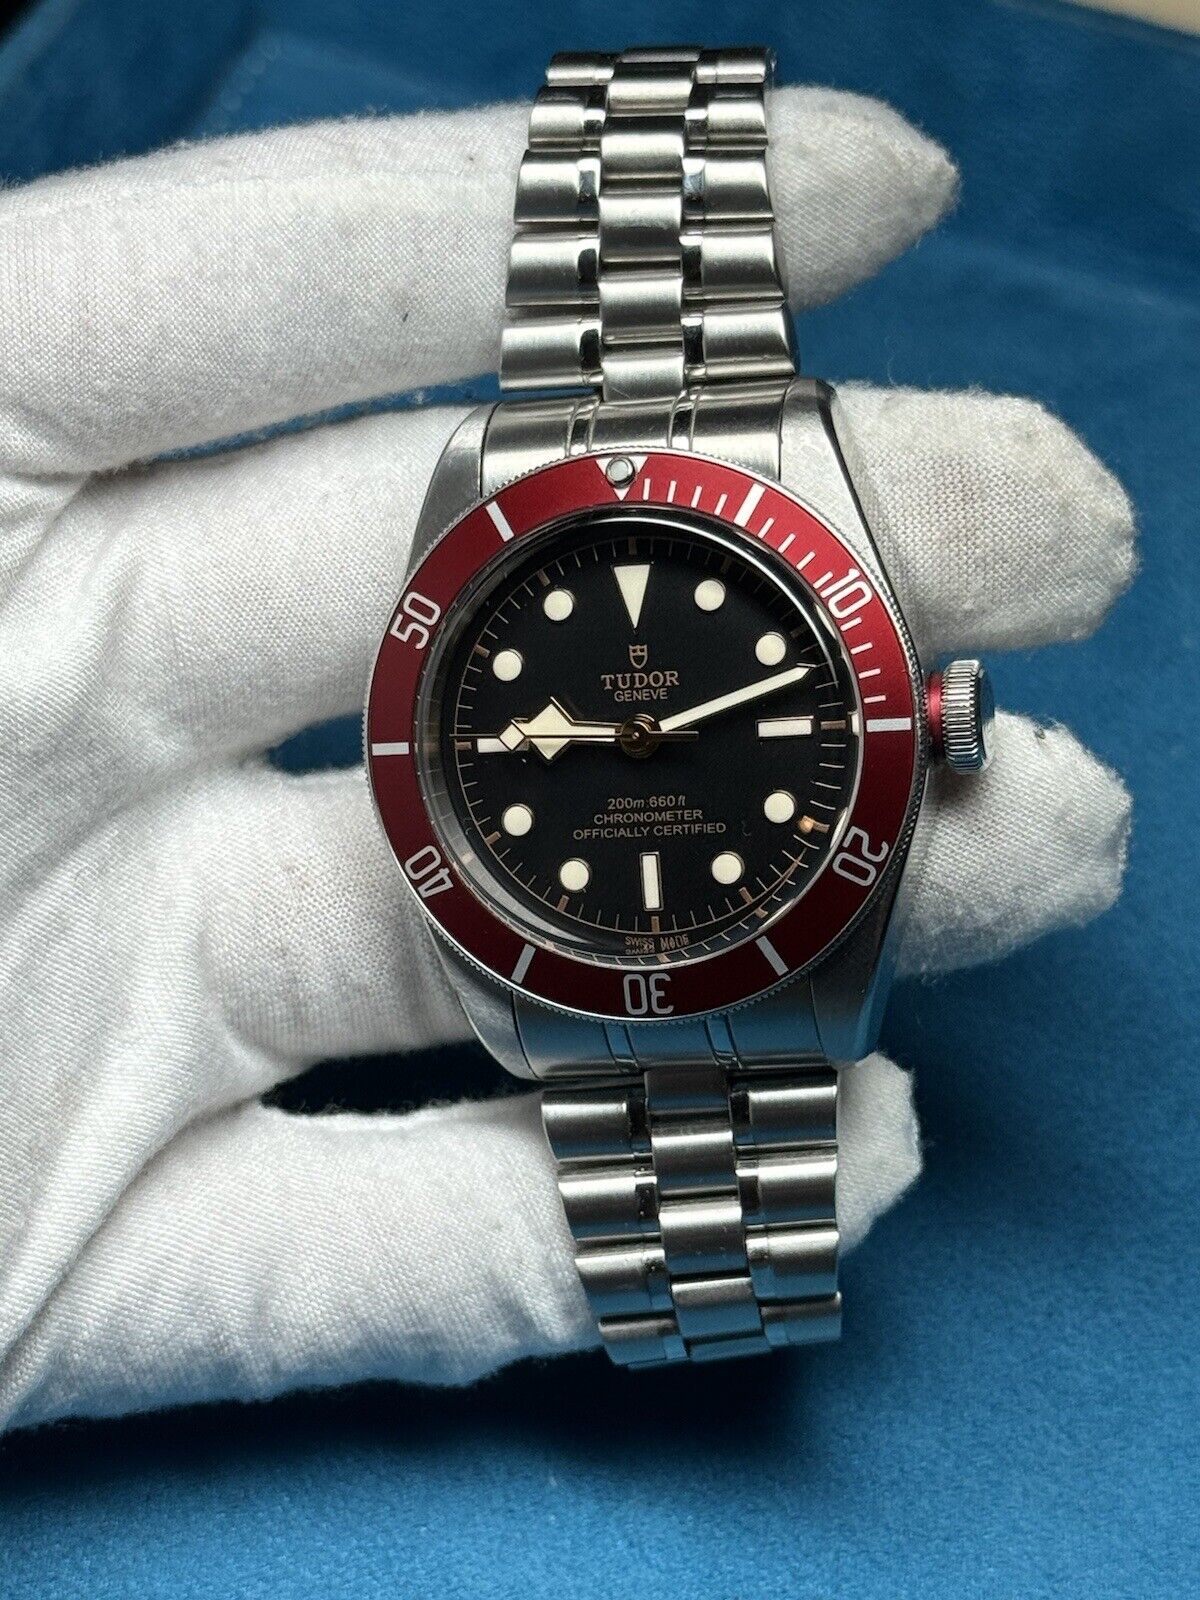 Tudor Black Bay Heritage Stainless Steel Red 41mm Watch 79230R